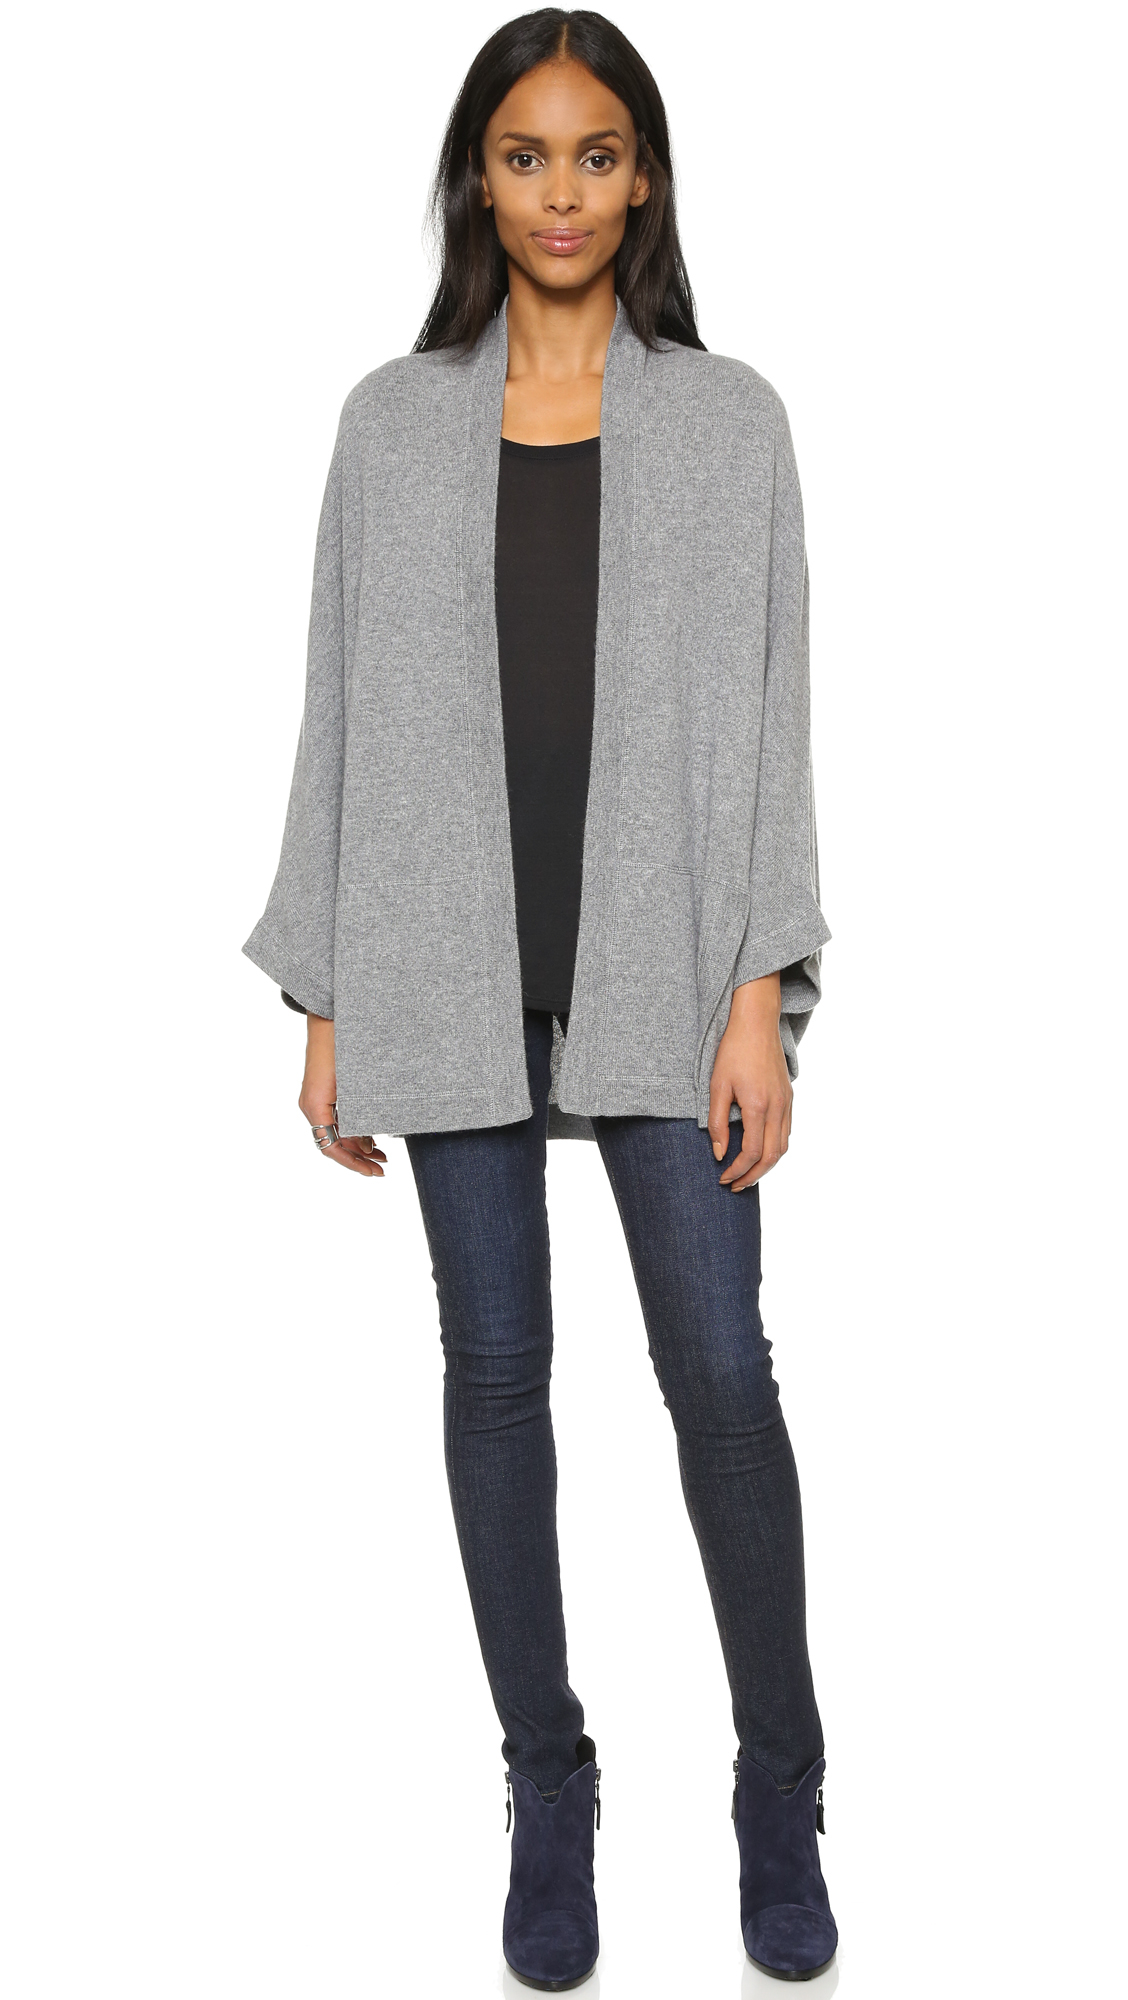 Lyst - Vince Cashmere Cape - Heather Stone in Gray